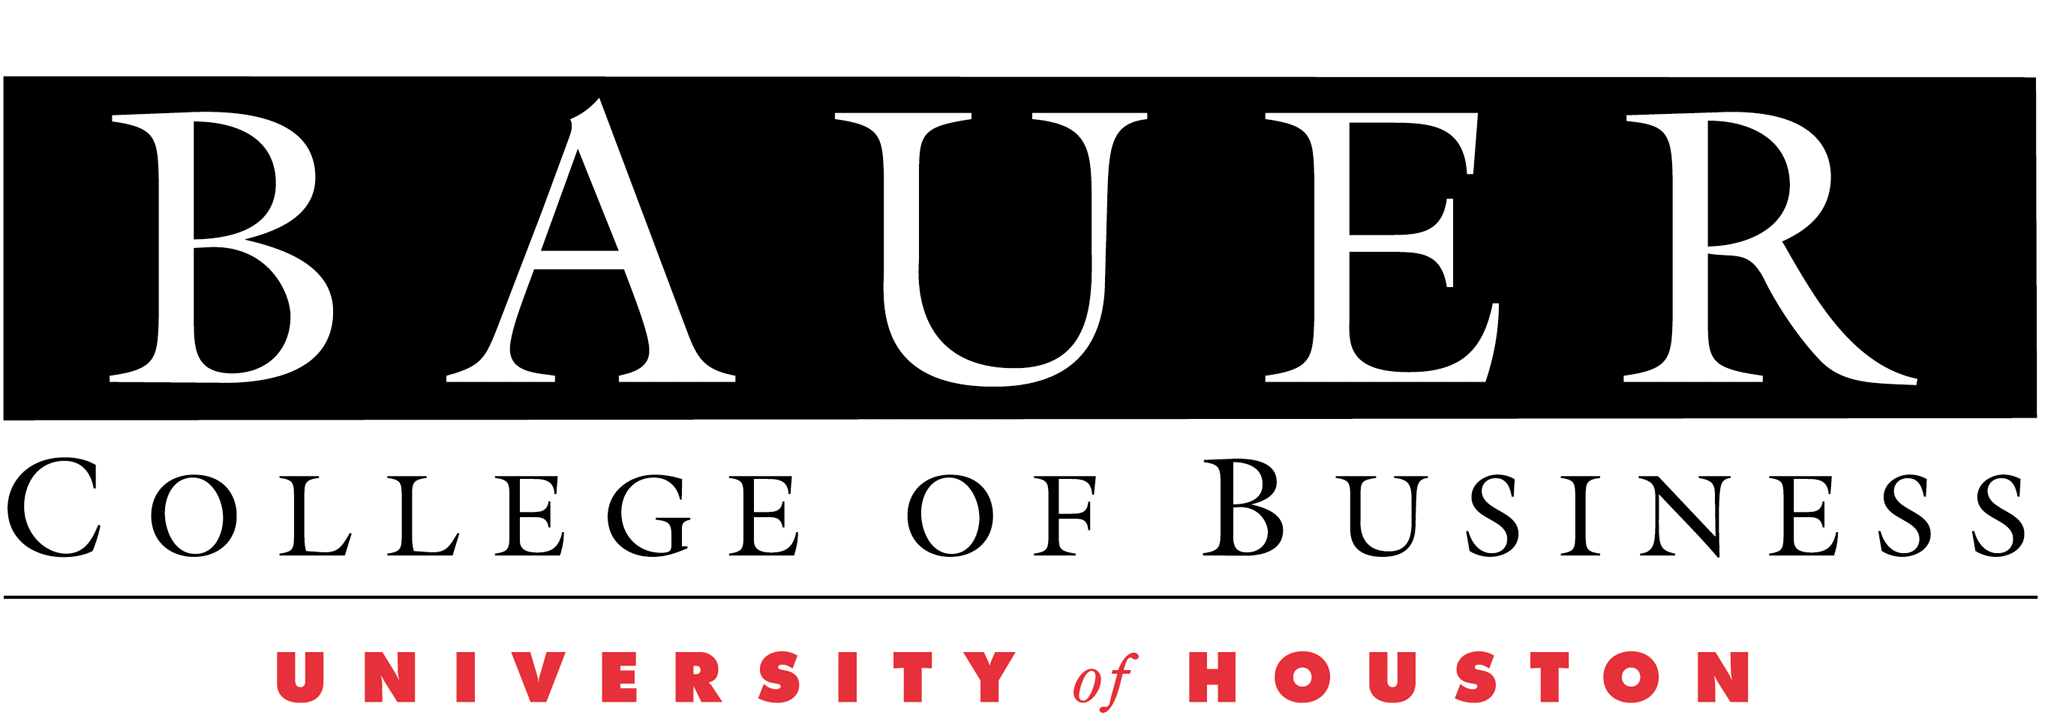 Bauer College of Business Home Page